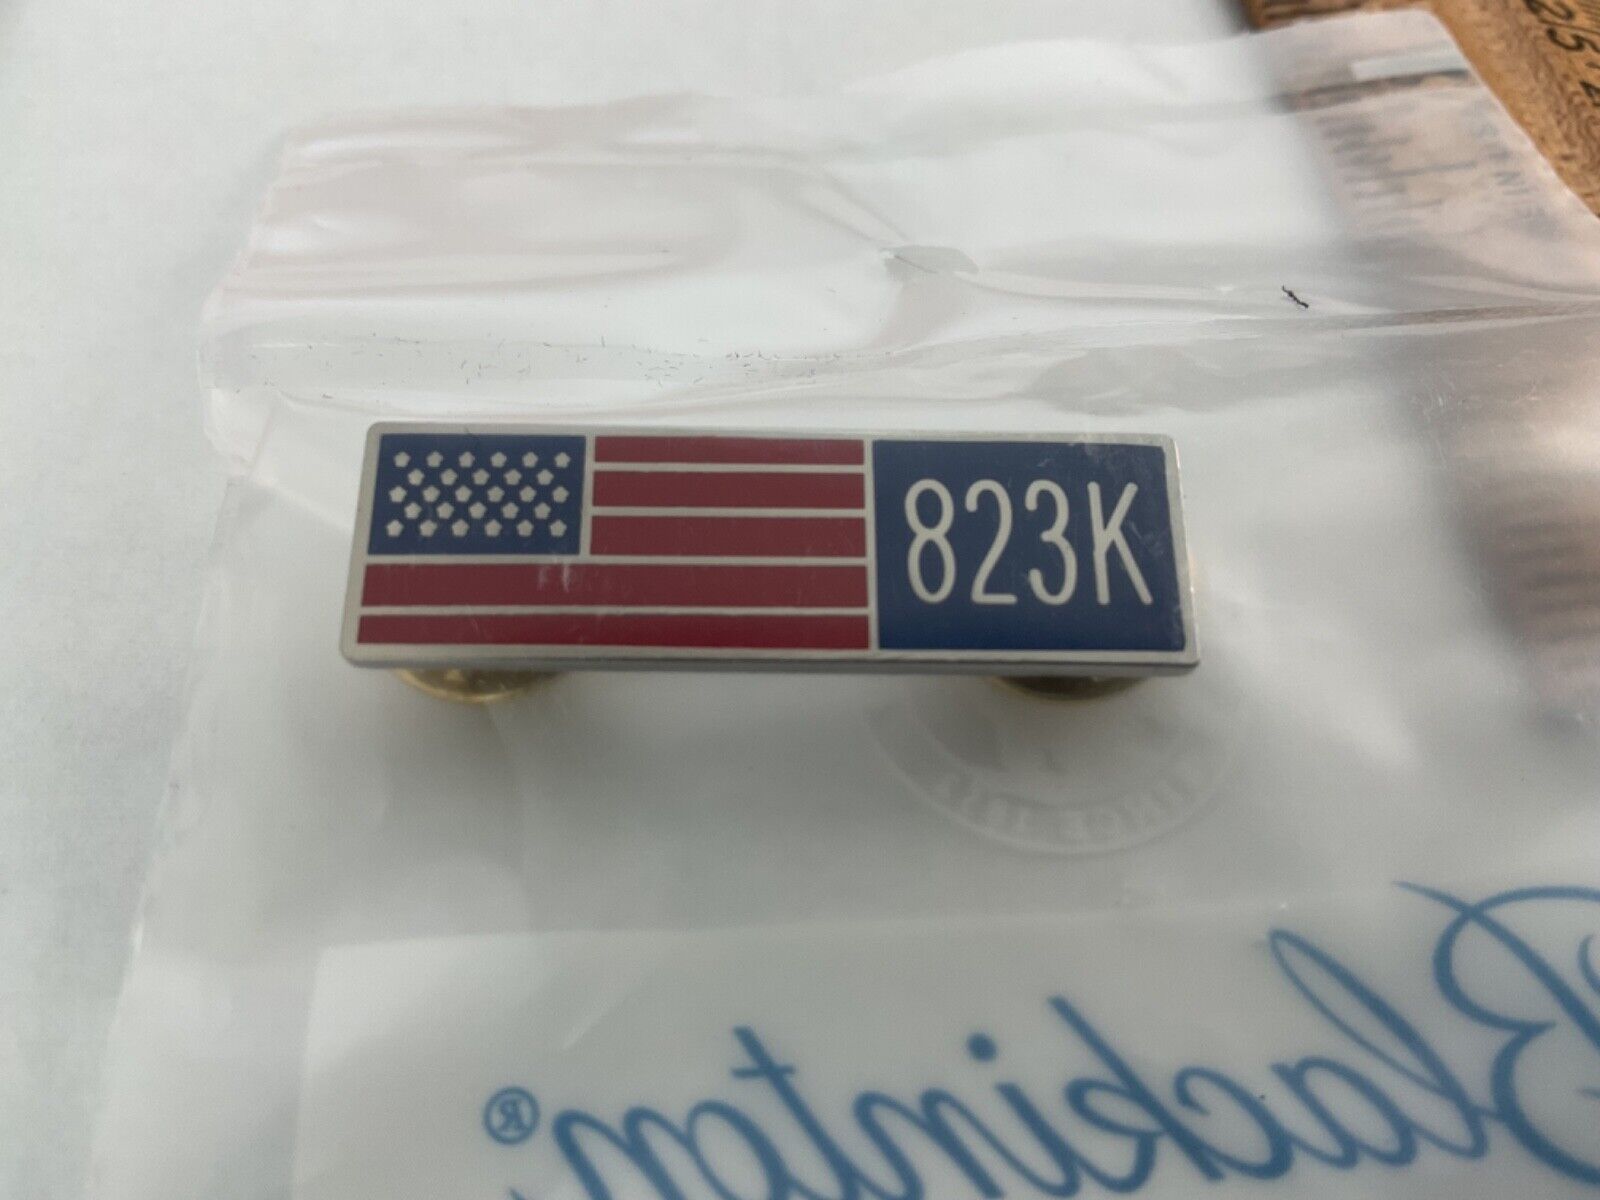 Flag pin with 823K added Made by V.H. Blackinton in the USA 1 3/8” by 3/8 wide